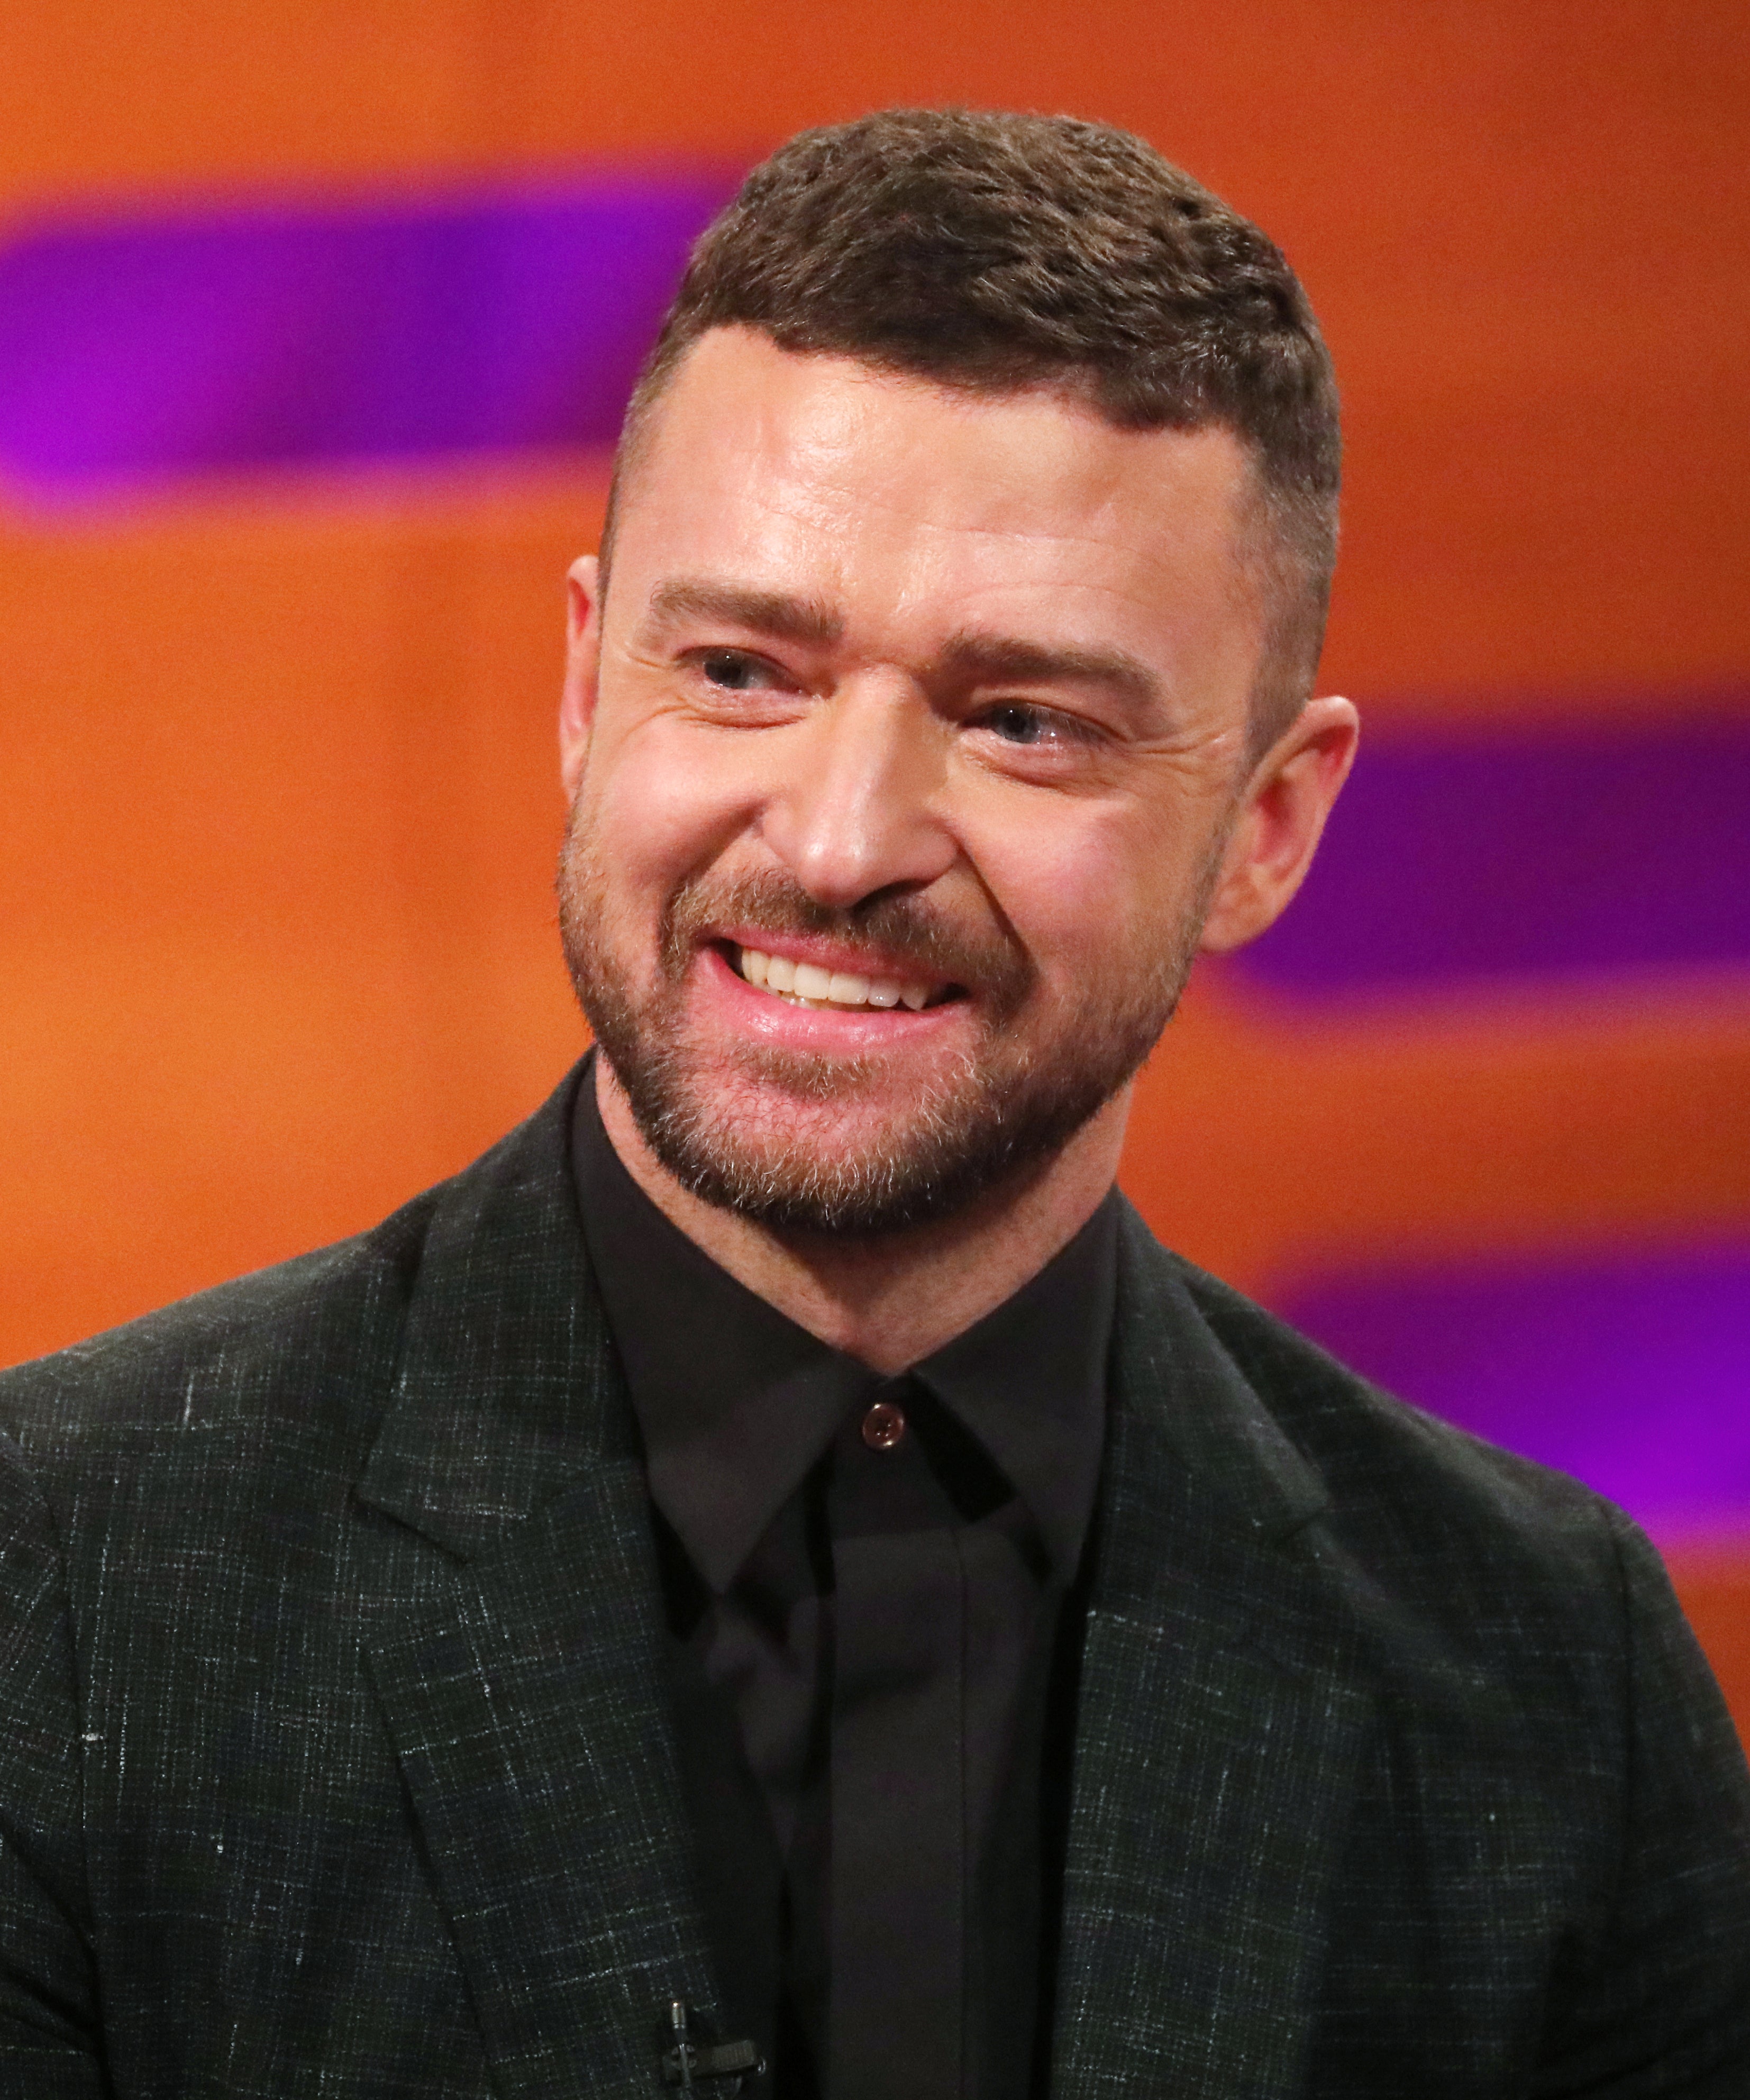 Justin Timberlake Seen for the First Time Since His Public Apology